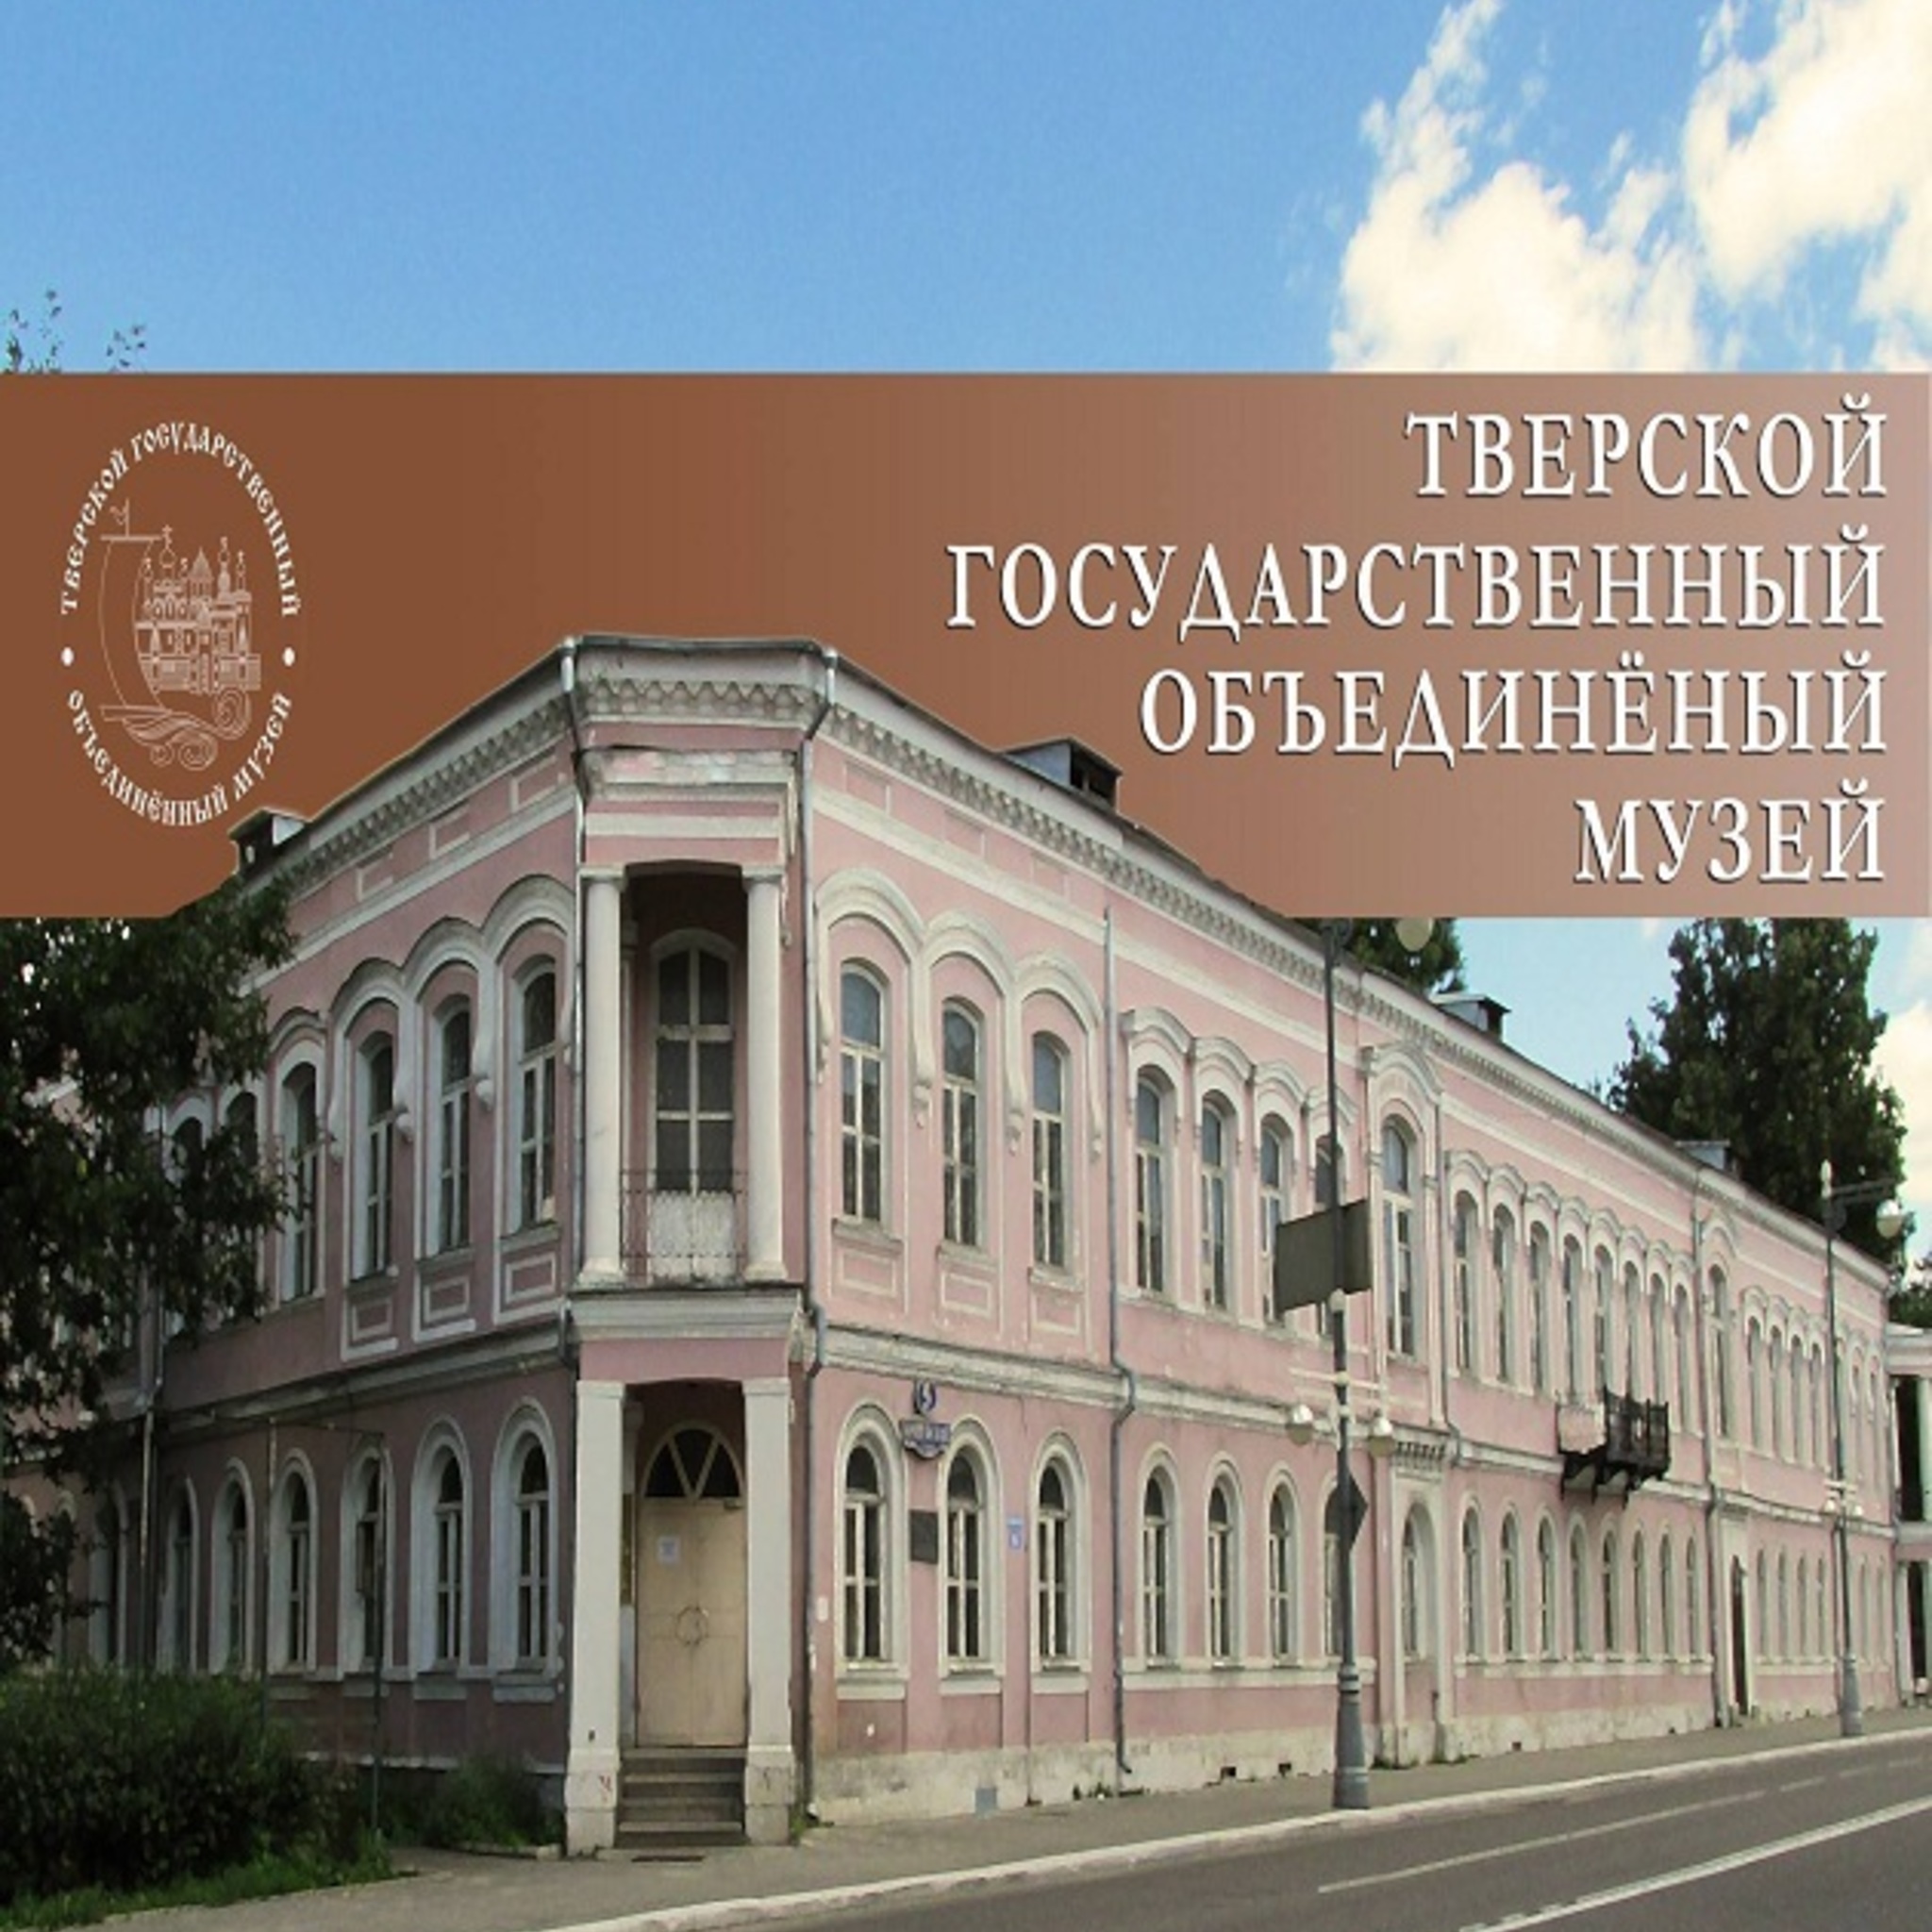 Our events Tver State United Museum on September 2015